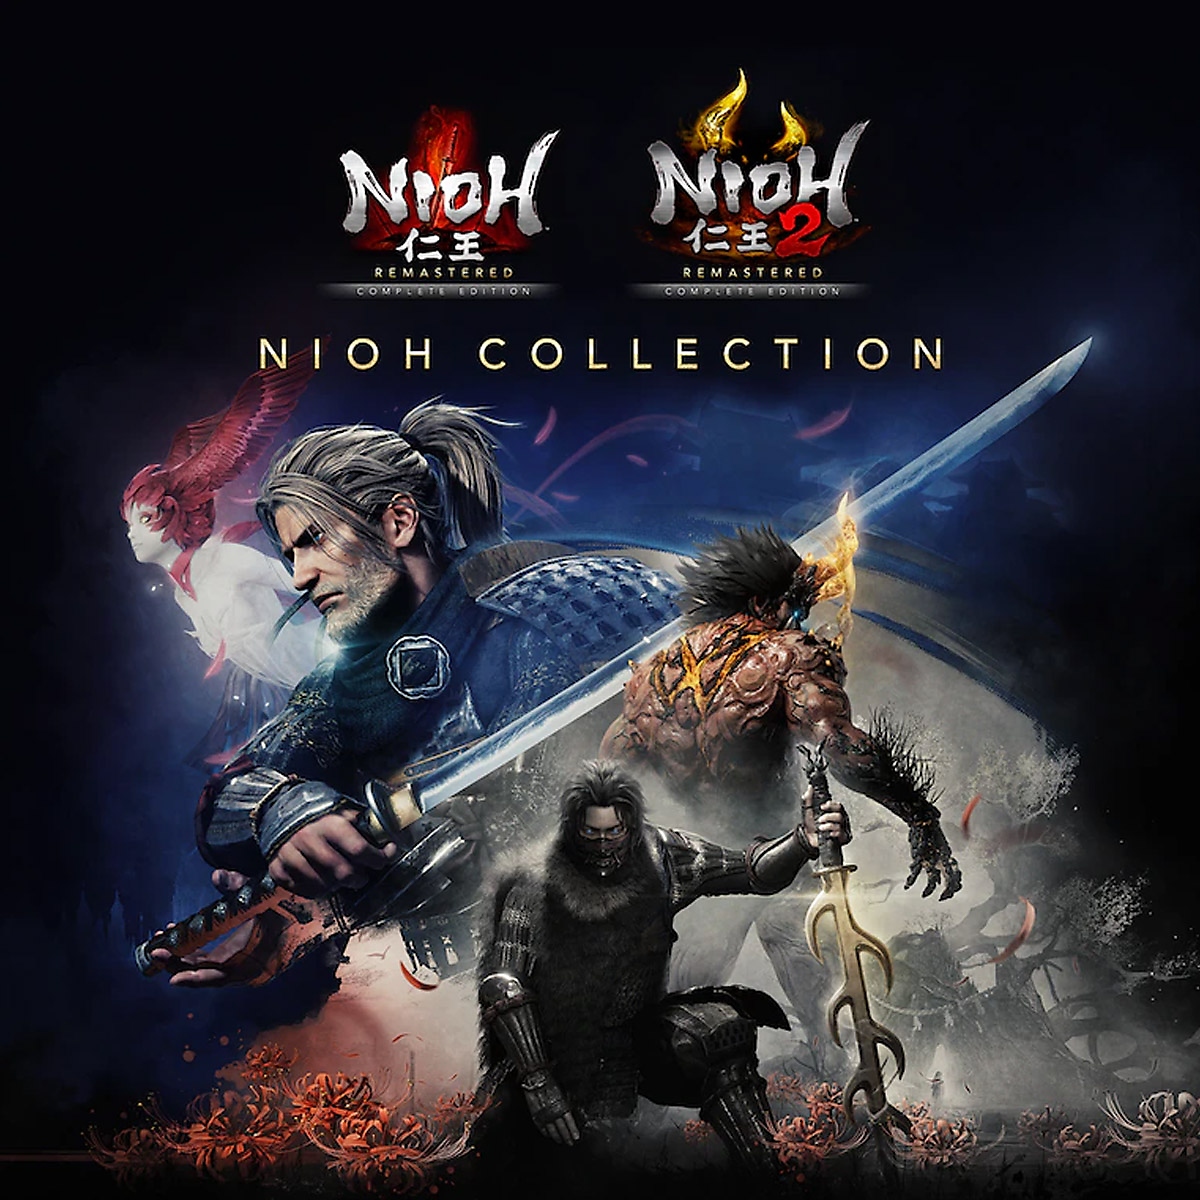 Nioh Collection product packshot